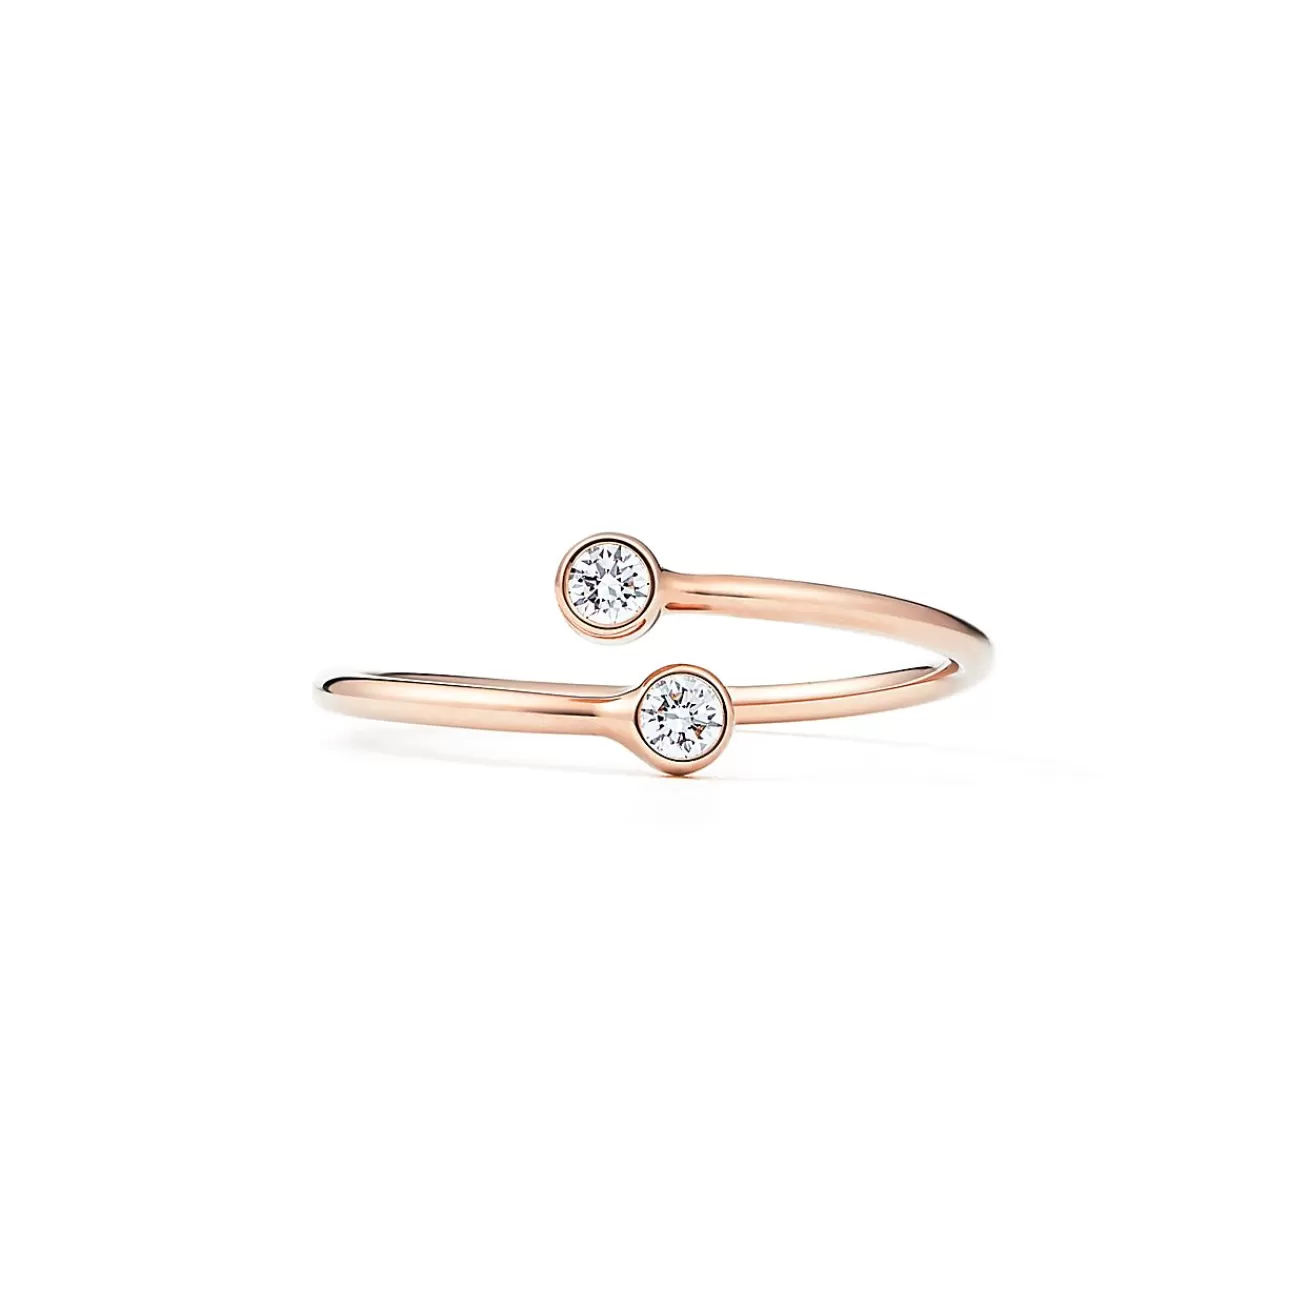 Tiffany & Co. Elsa Peretti® Diamond Hoop ring in 18k rose gold with diamonds. | ^ Rings | Rose Gold Jewelry